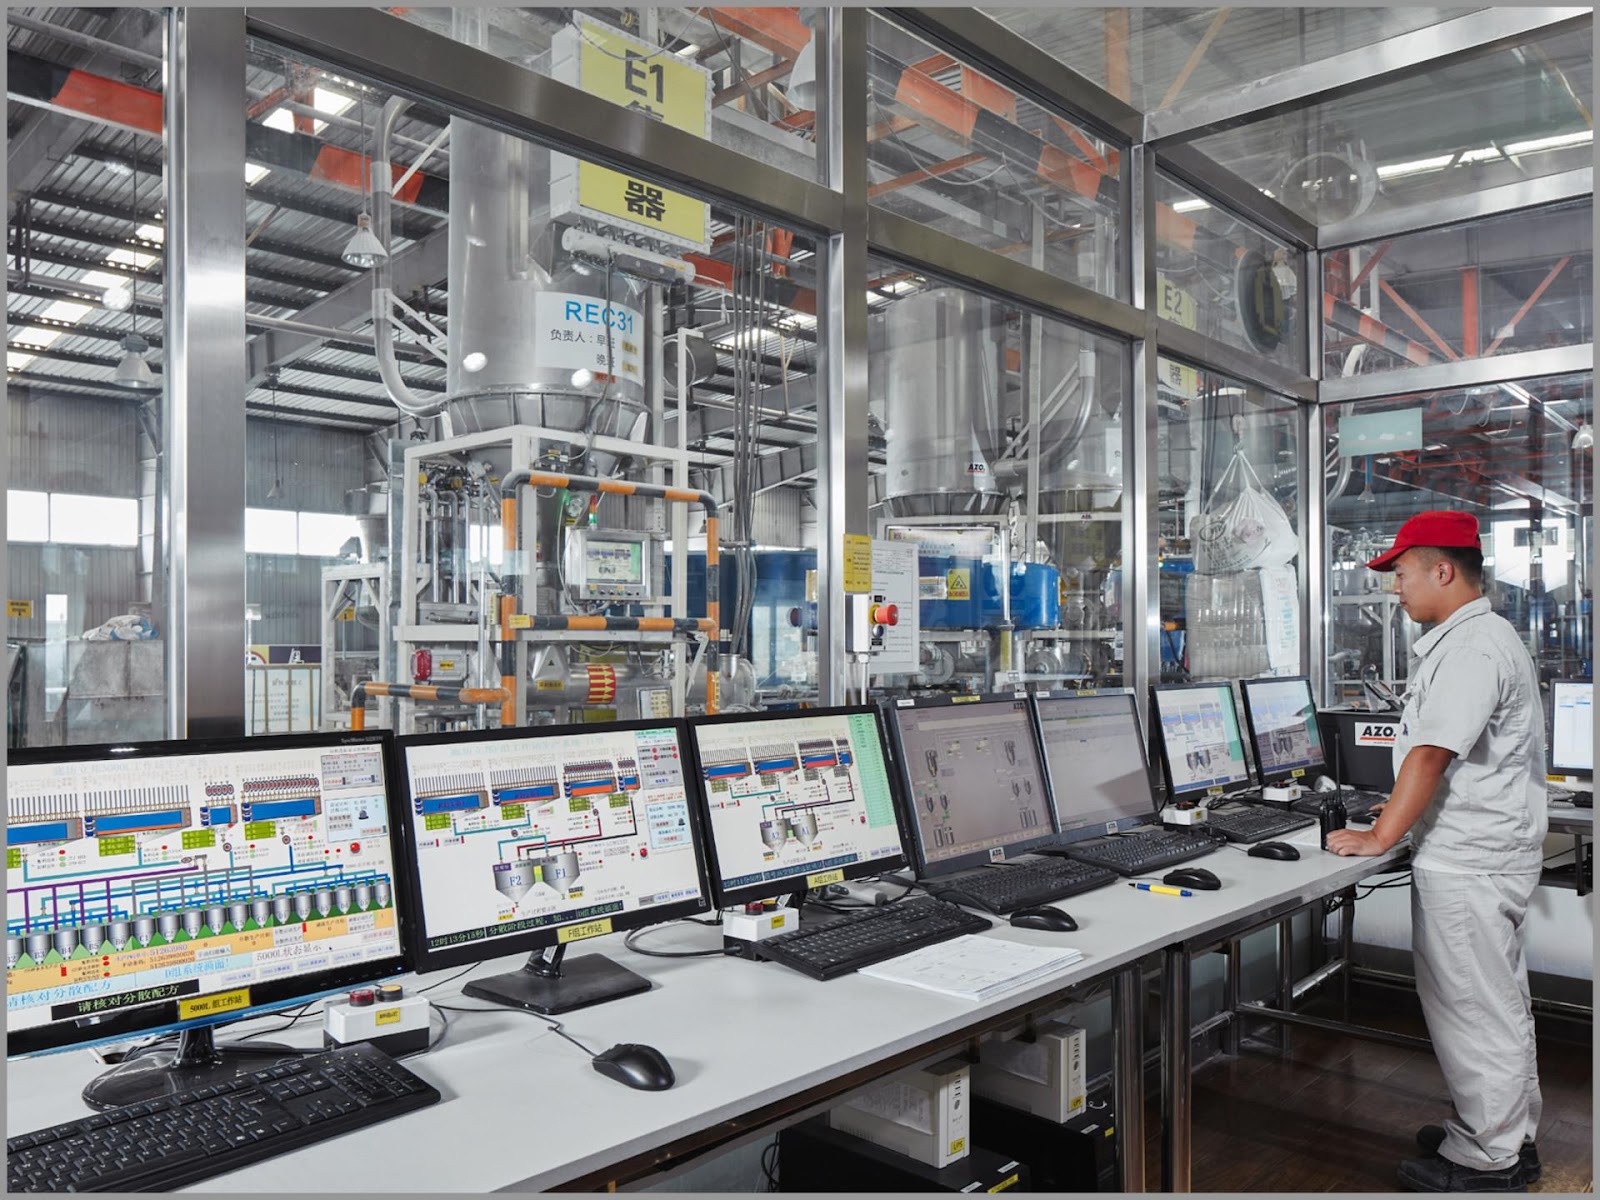 azo bulk material handling controls system in use at a production facility